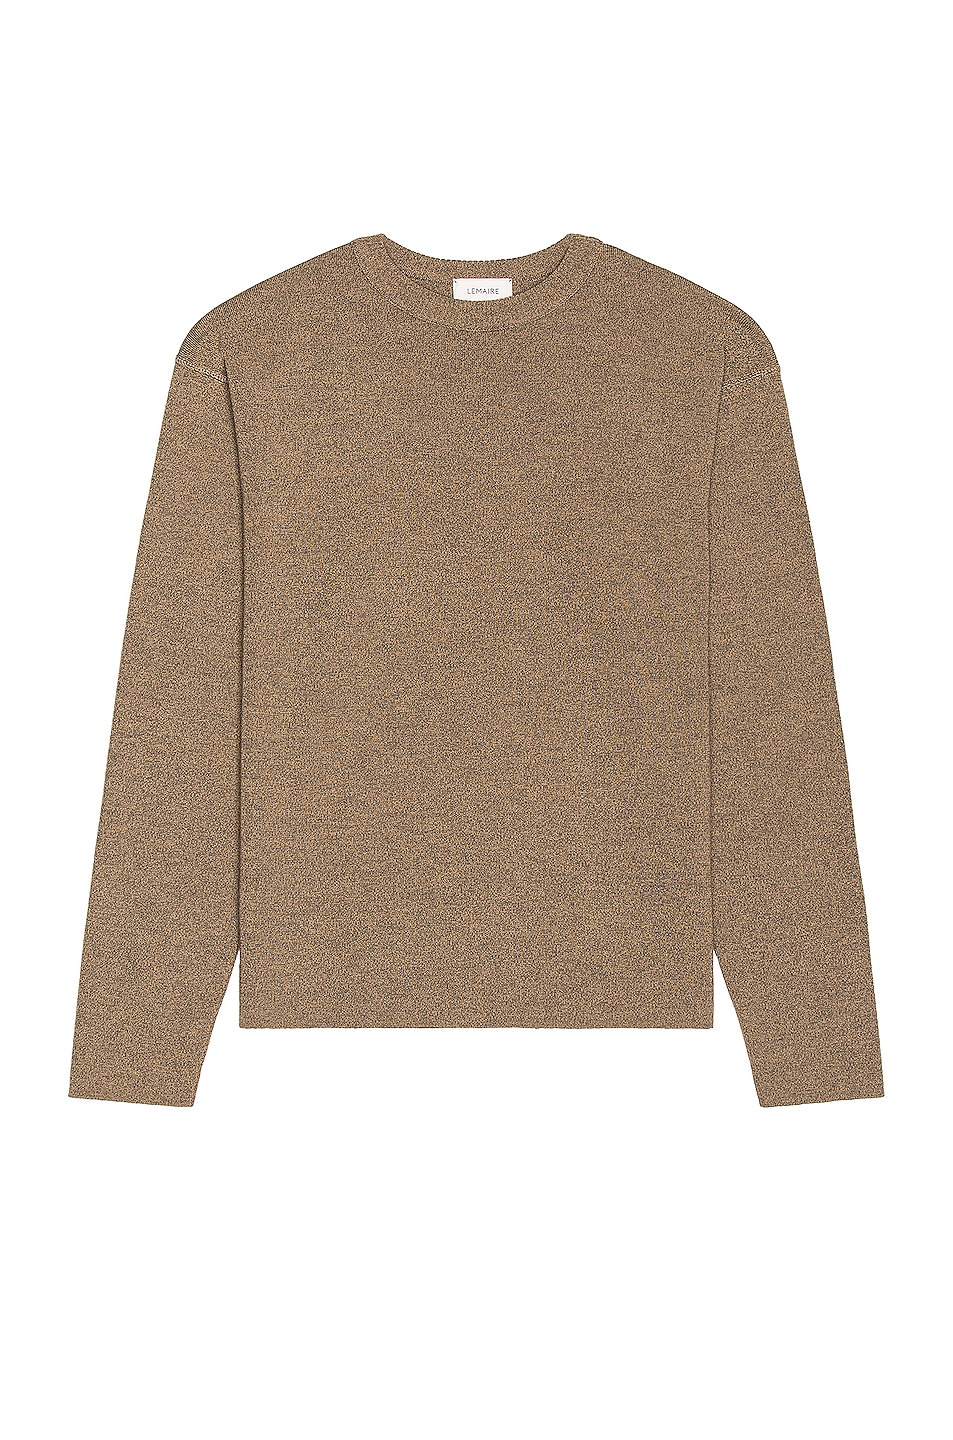 Image 1 of Lemaire Crew Neck Rib Sweater in Mustard Chine